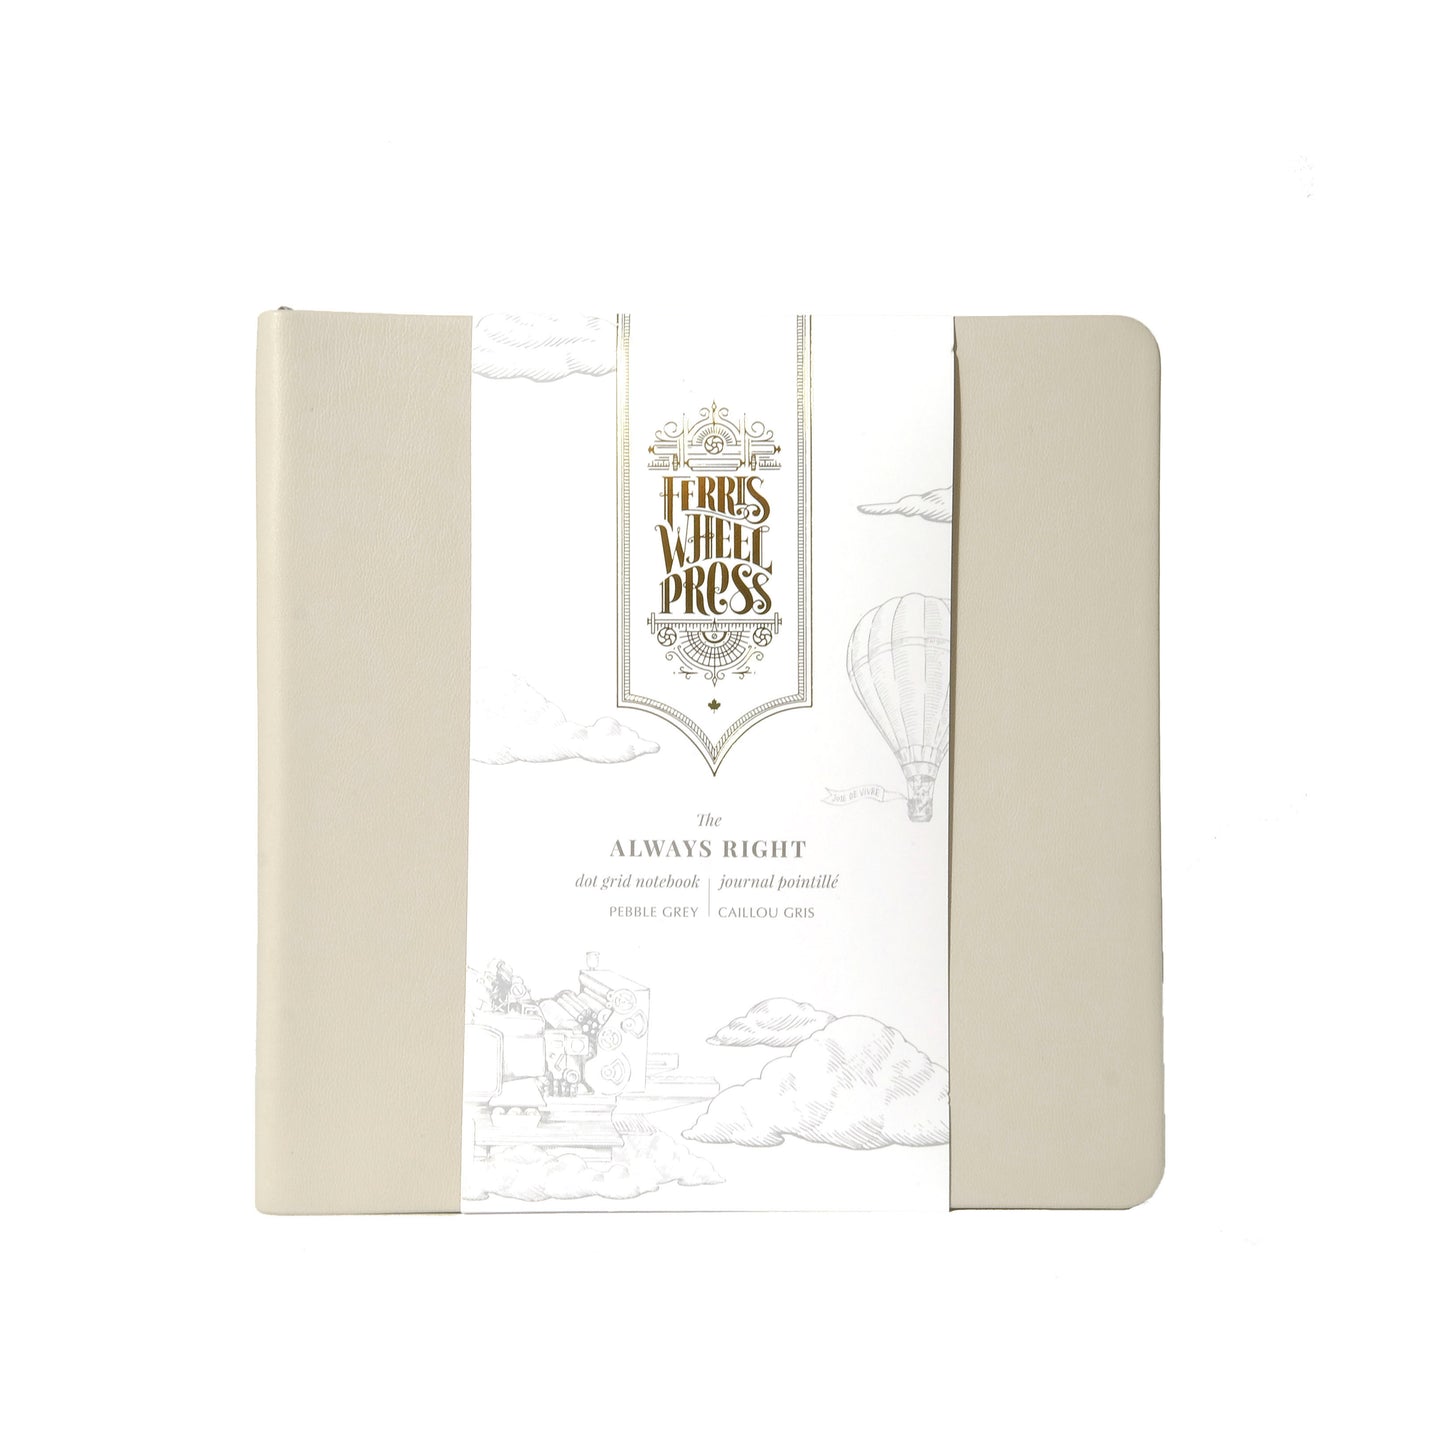 Always Right Square Fether Notebook by Ferris Wheel Press